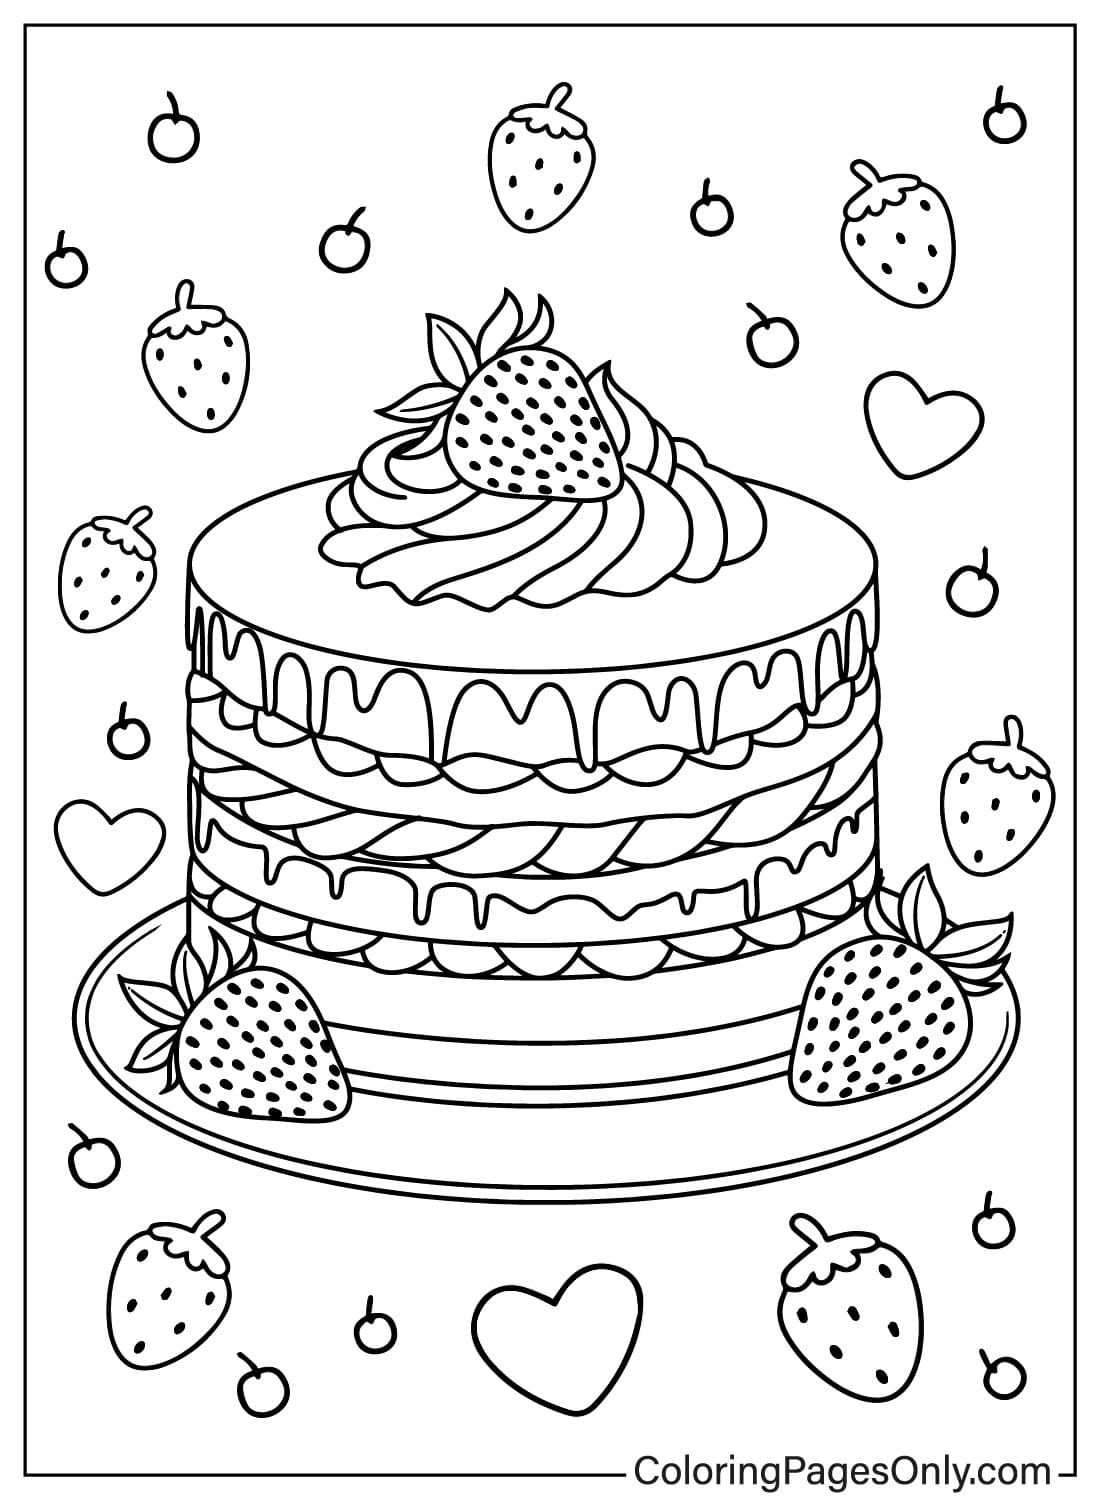 Birthday Cake Coloring Page Free Printable from Birthday Cake